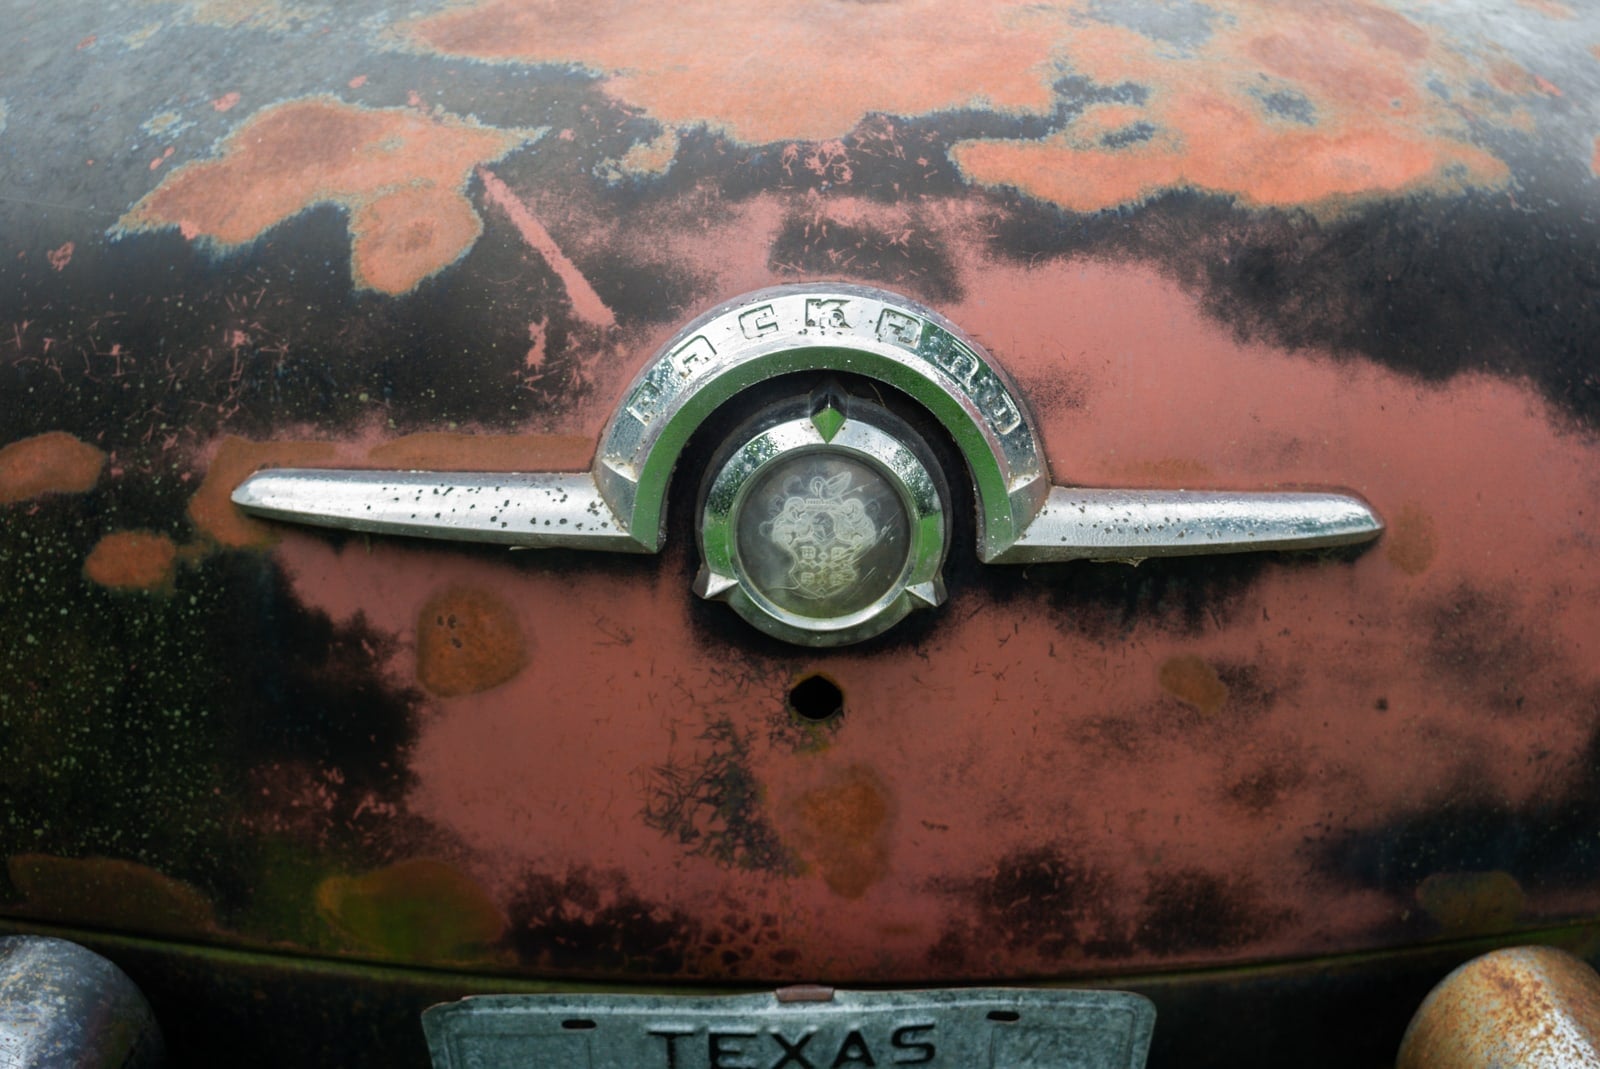 A rusted vintage care, Packard Motor Car Company